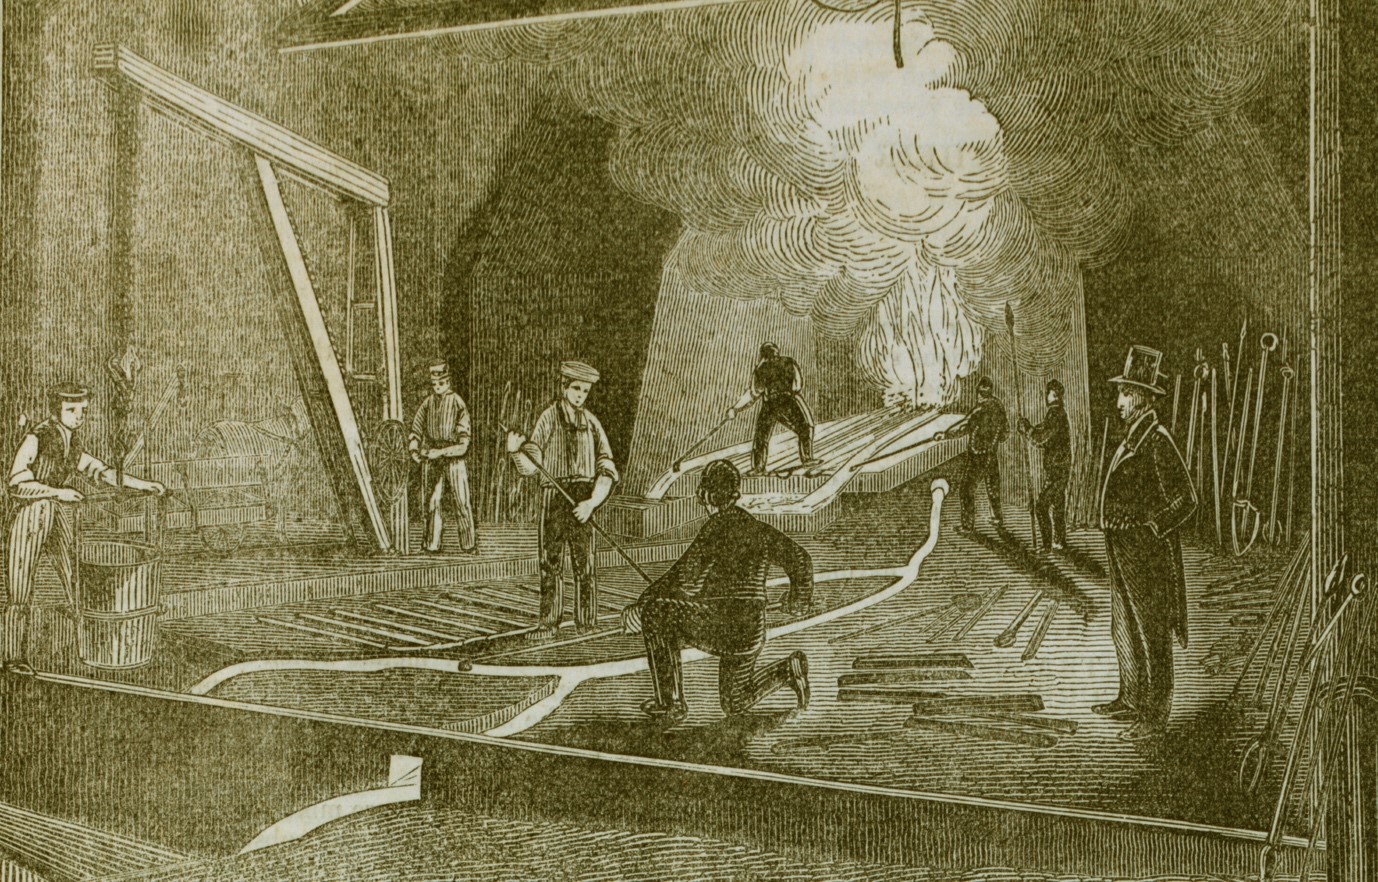 Workers in an iron foundry in the mid-19th century – Sue's ancestors were in this trade